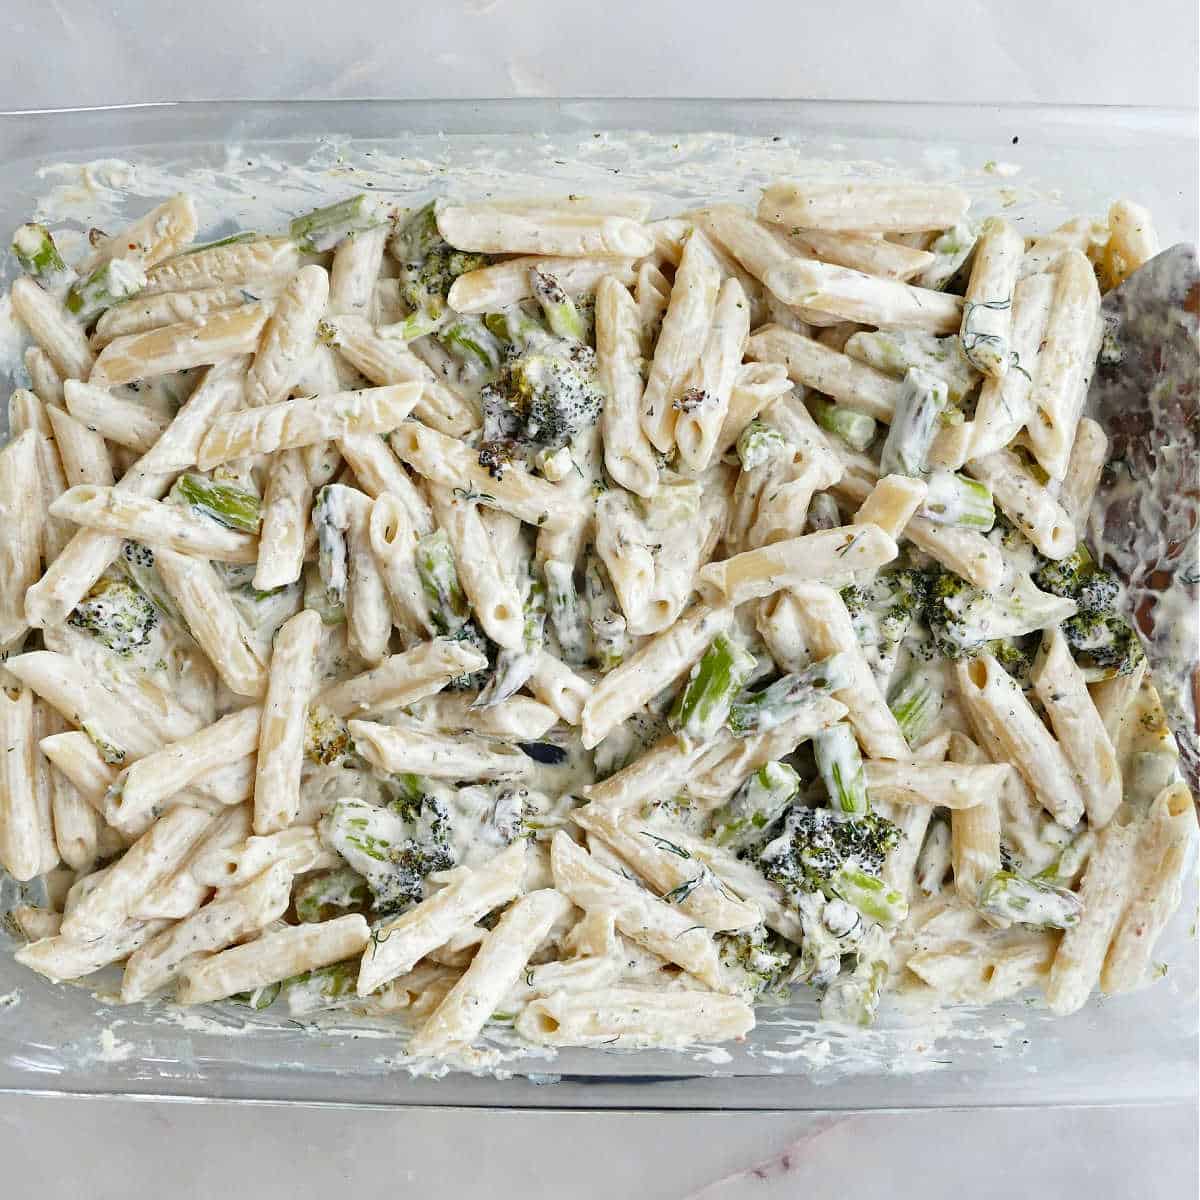 Asparagus broccoli pasta with penne noodles in a large casserole dish.